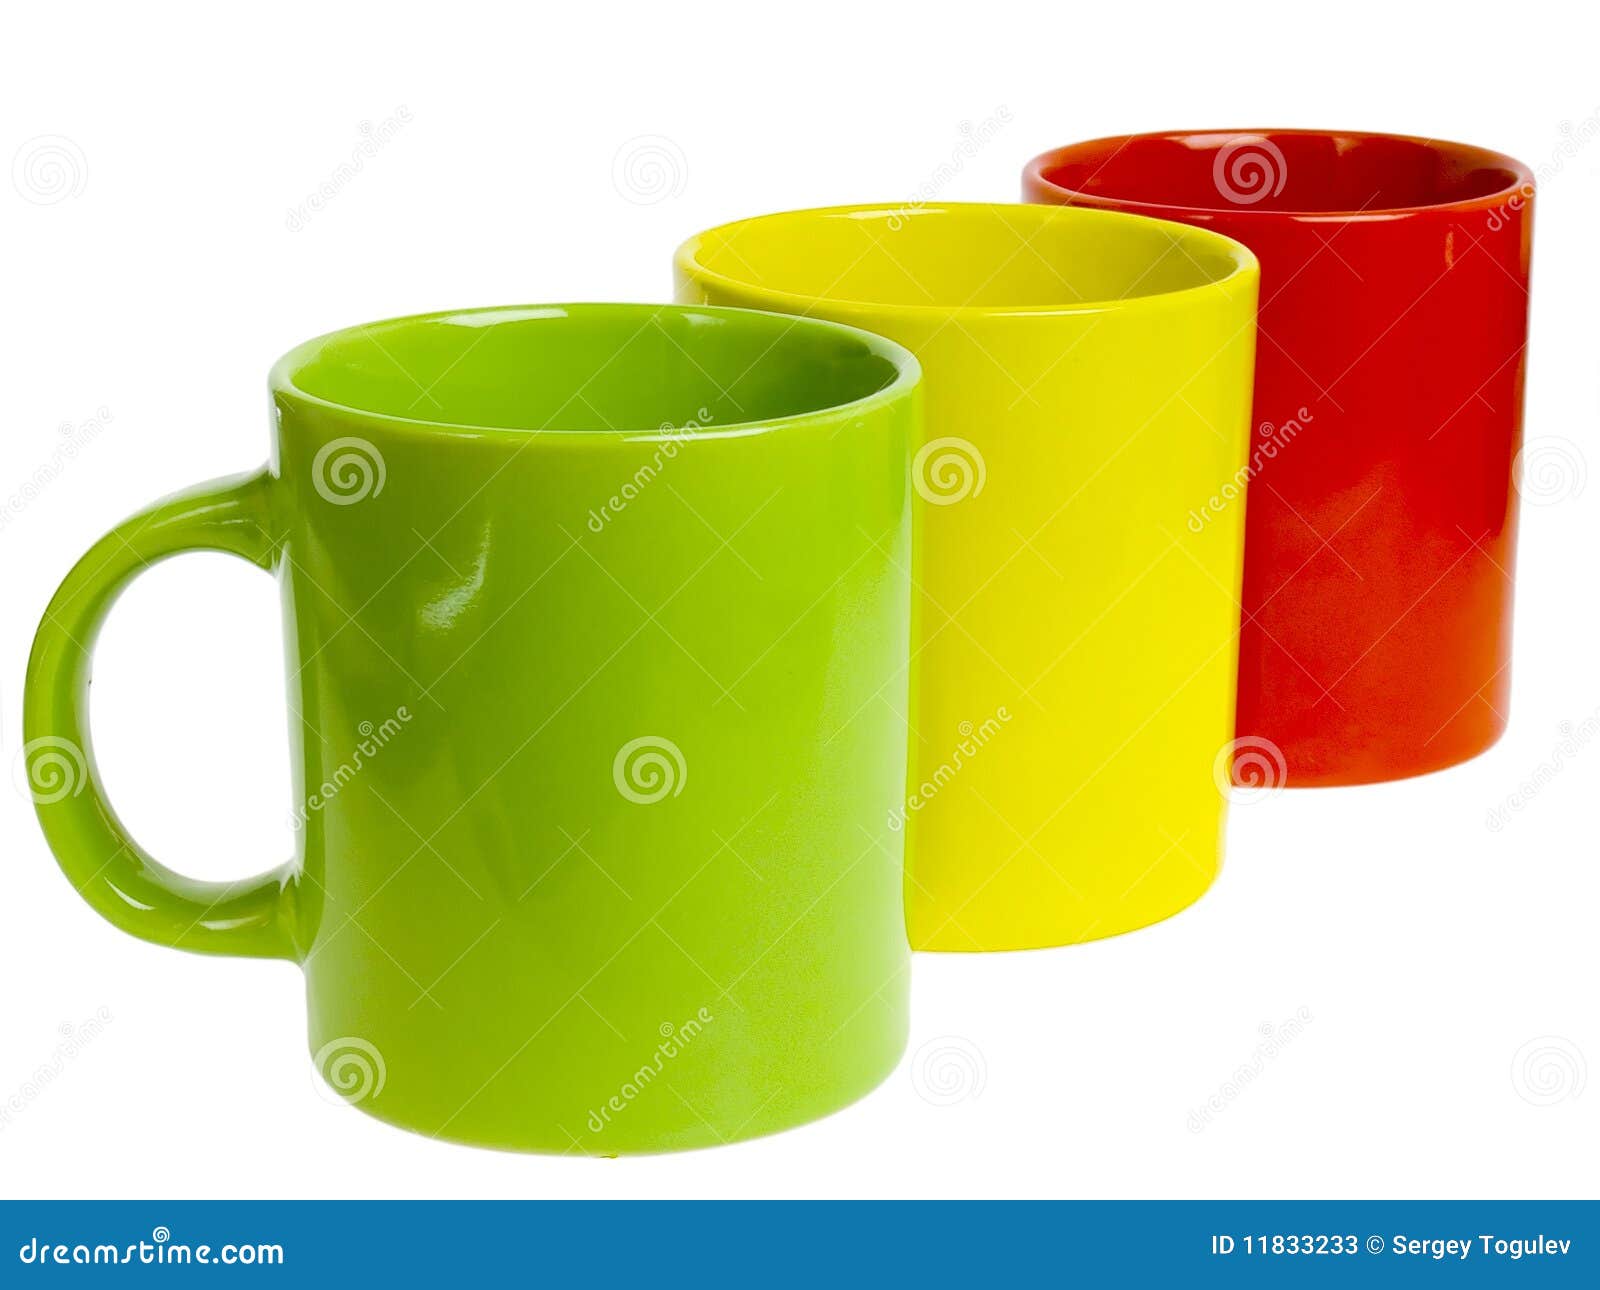 Red Green Yellow Cups Party Time Stock Vector (Royalty Free) 1325422721